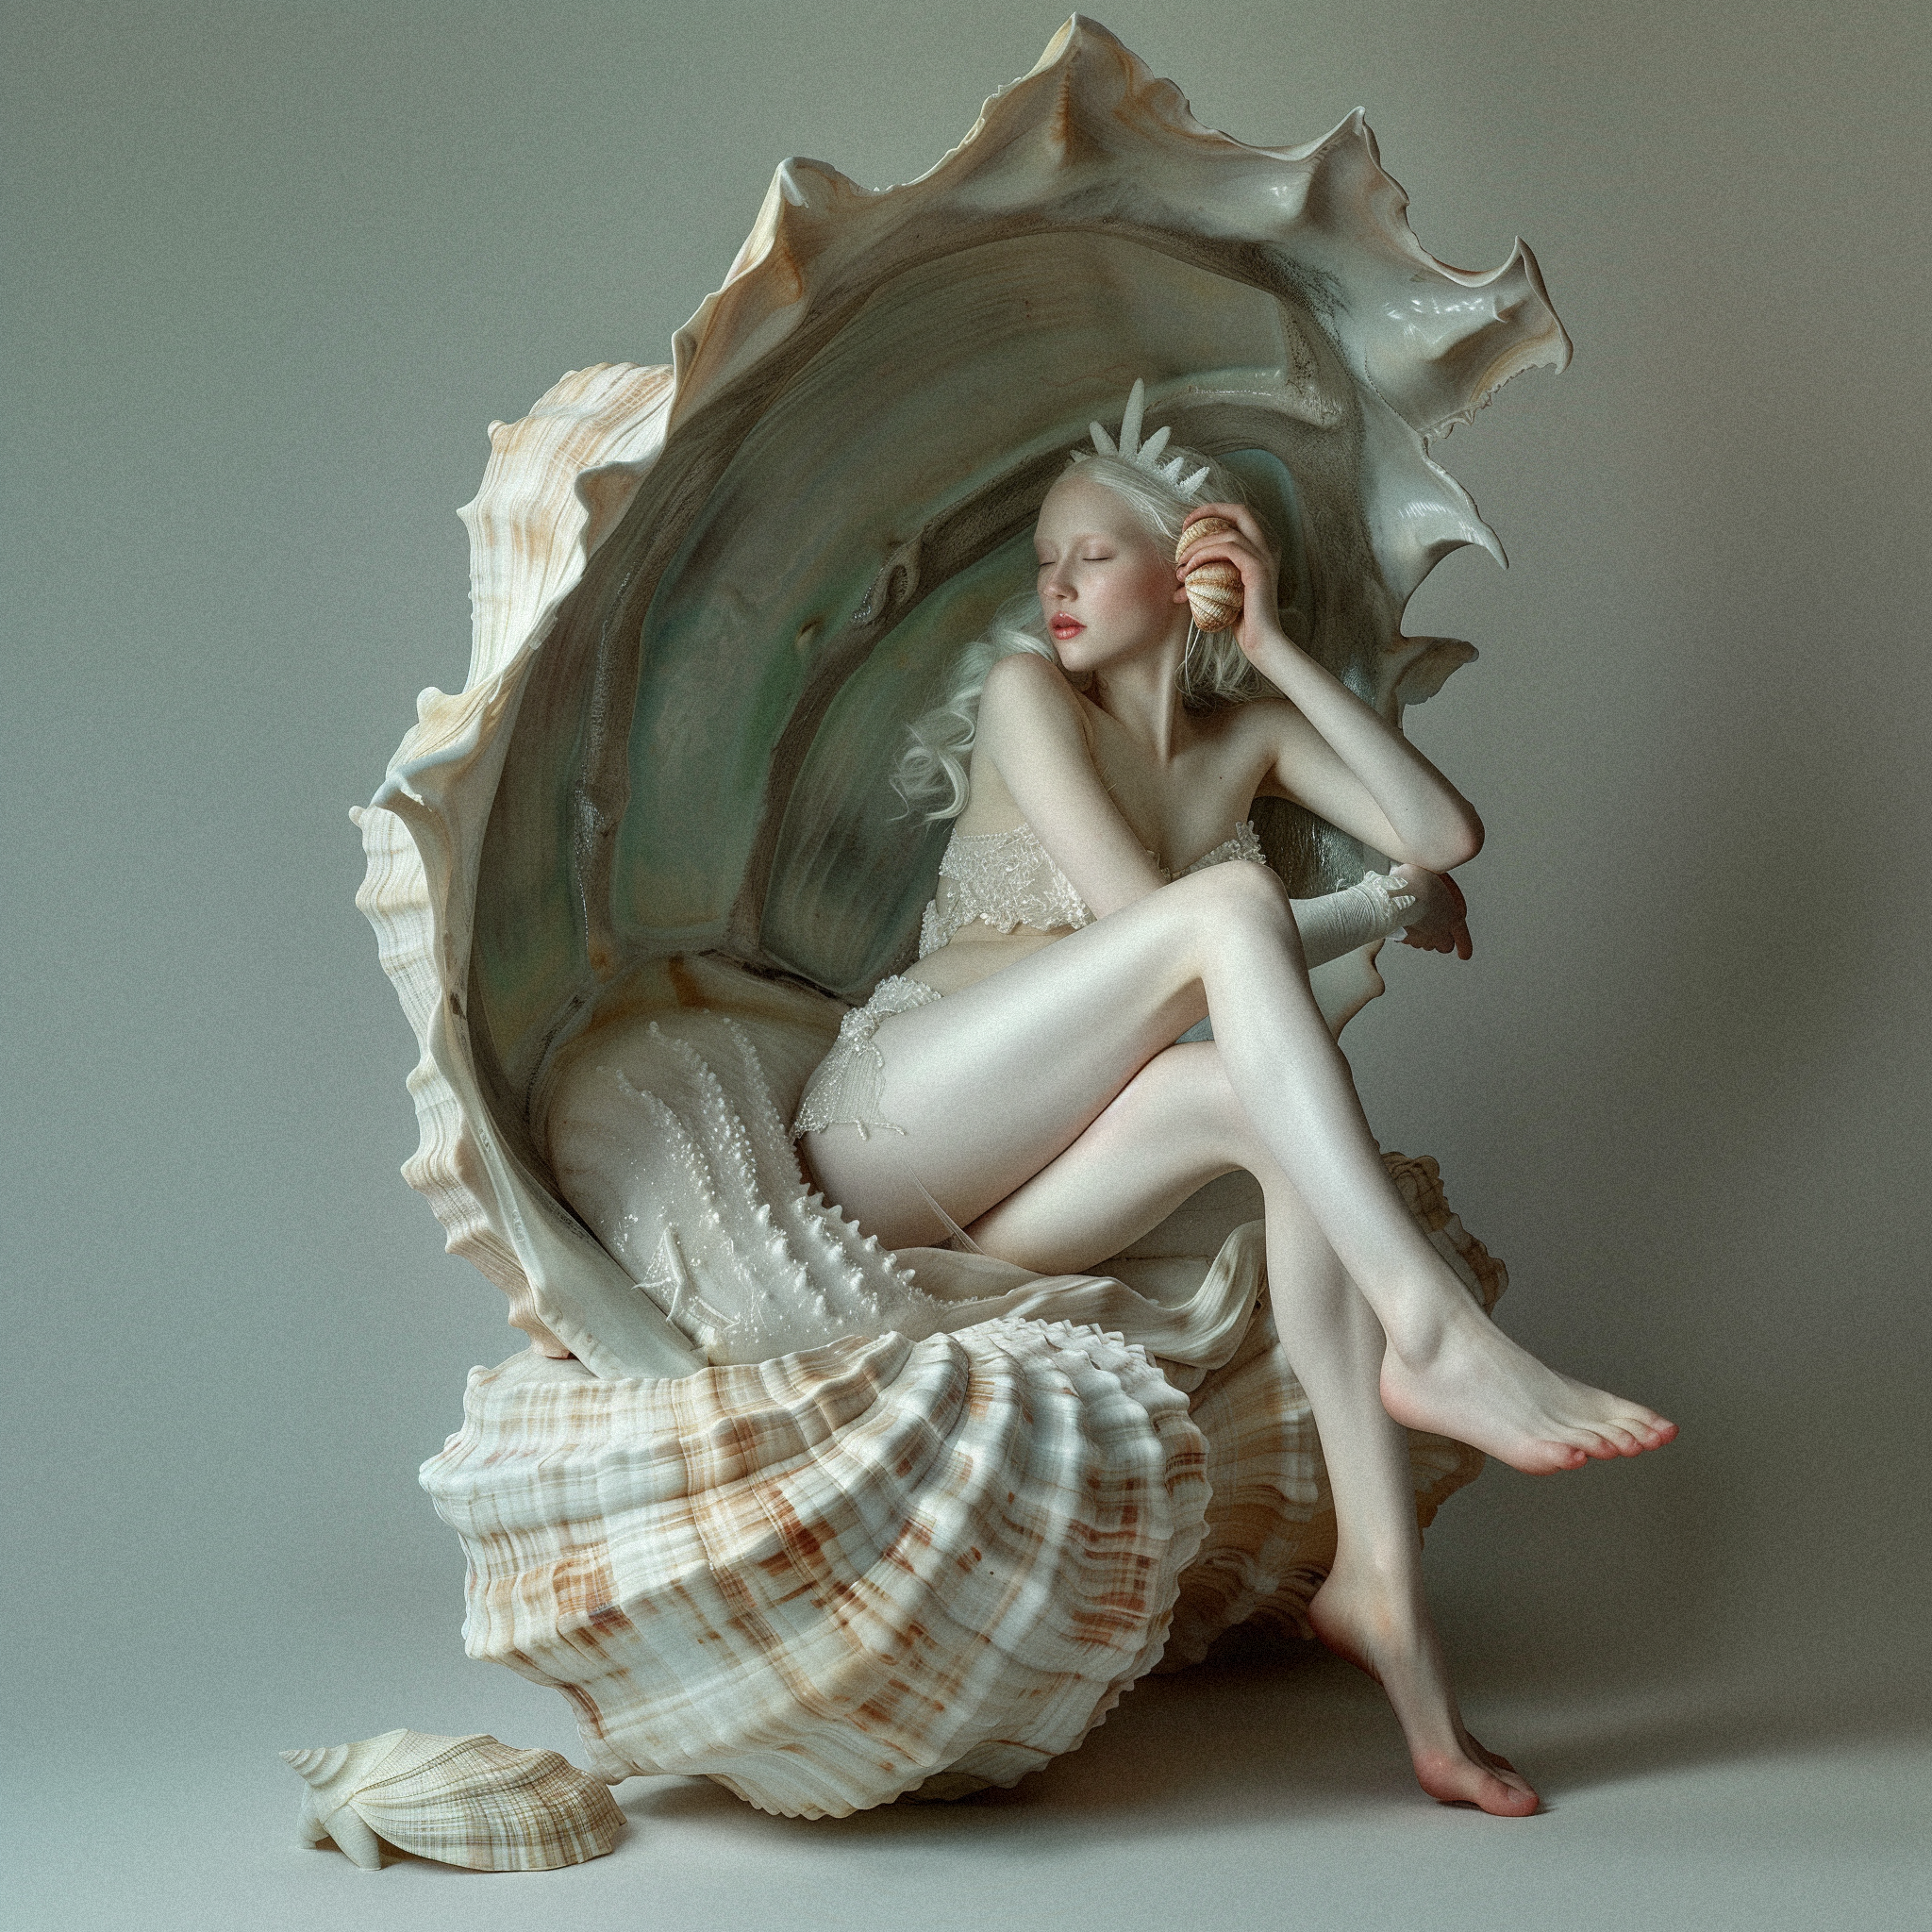 maeganm_siren_laying_in_a_large_decorative_shell_in_the_style_o_c094e049-e9d9-4205-92d8-50007b1b7581 copy.png